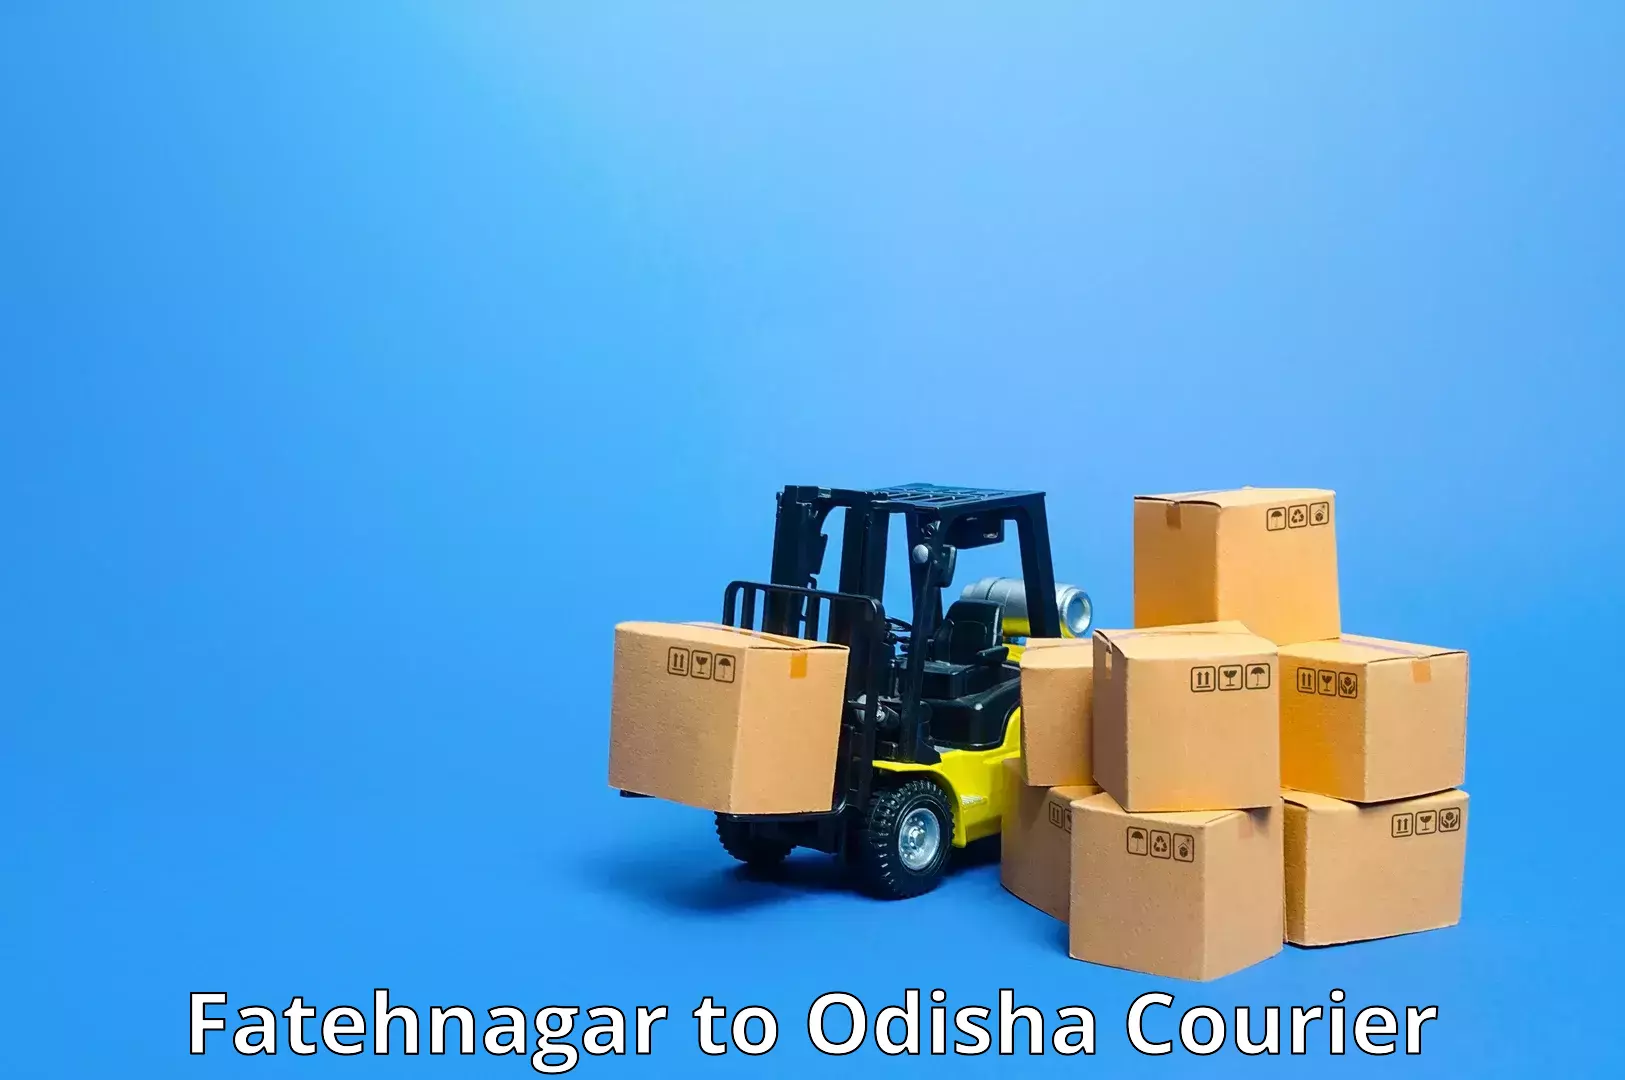 Quality courier partnerships Fatehnagar to Asika